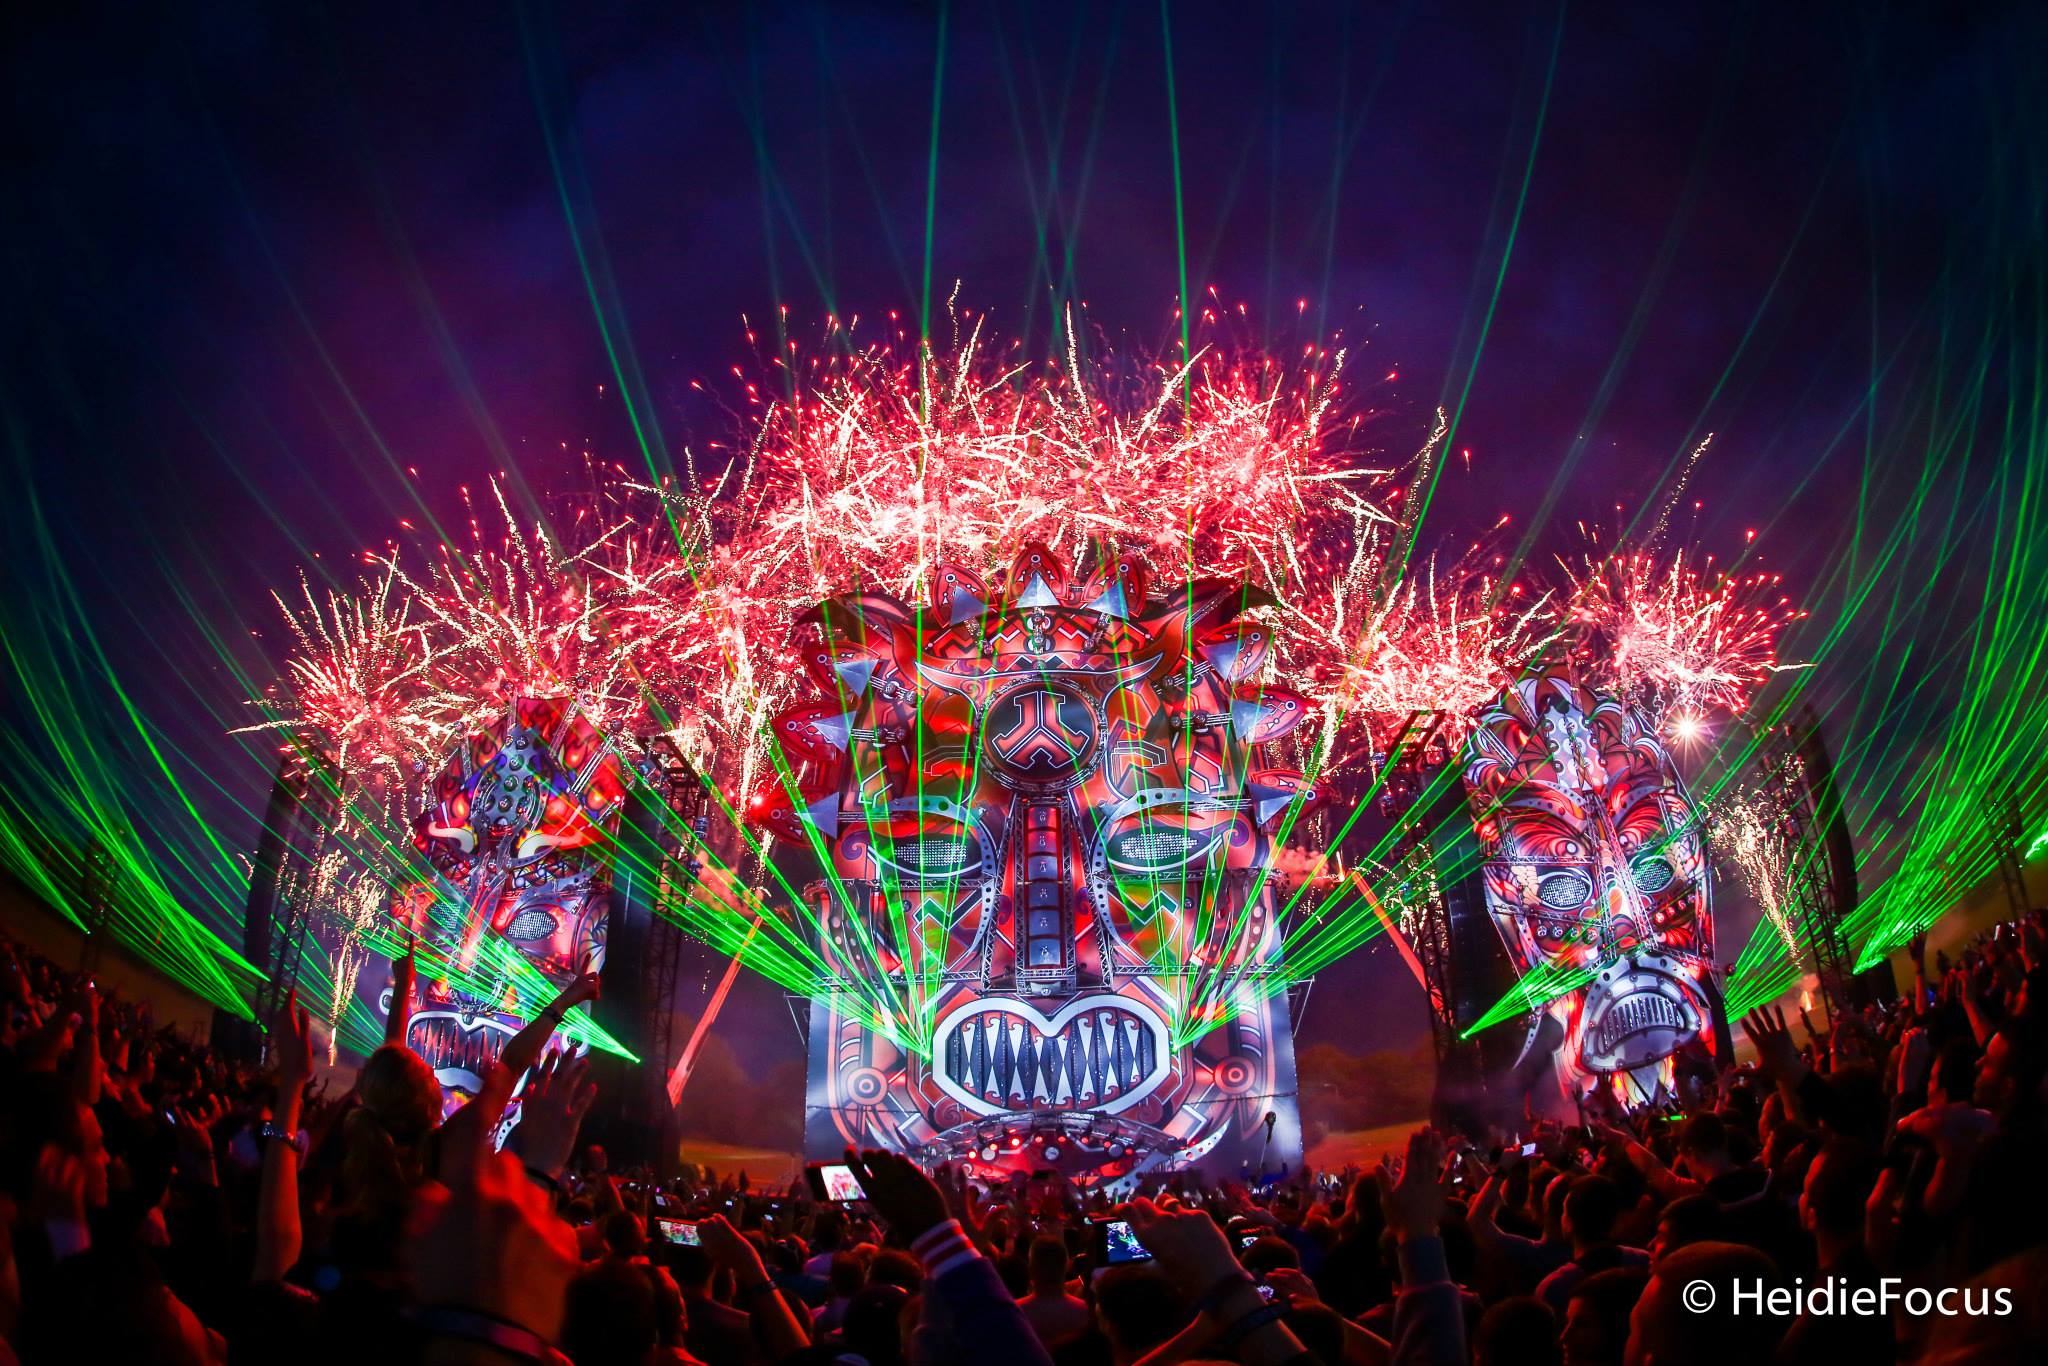 Eye candy: 40+ photos of beautiful EDM festival stage designs